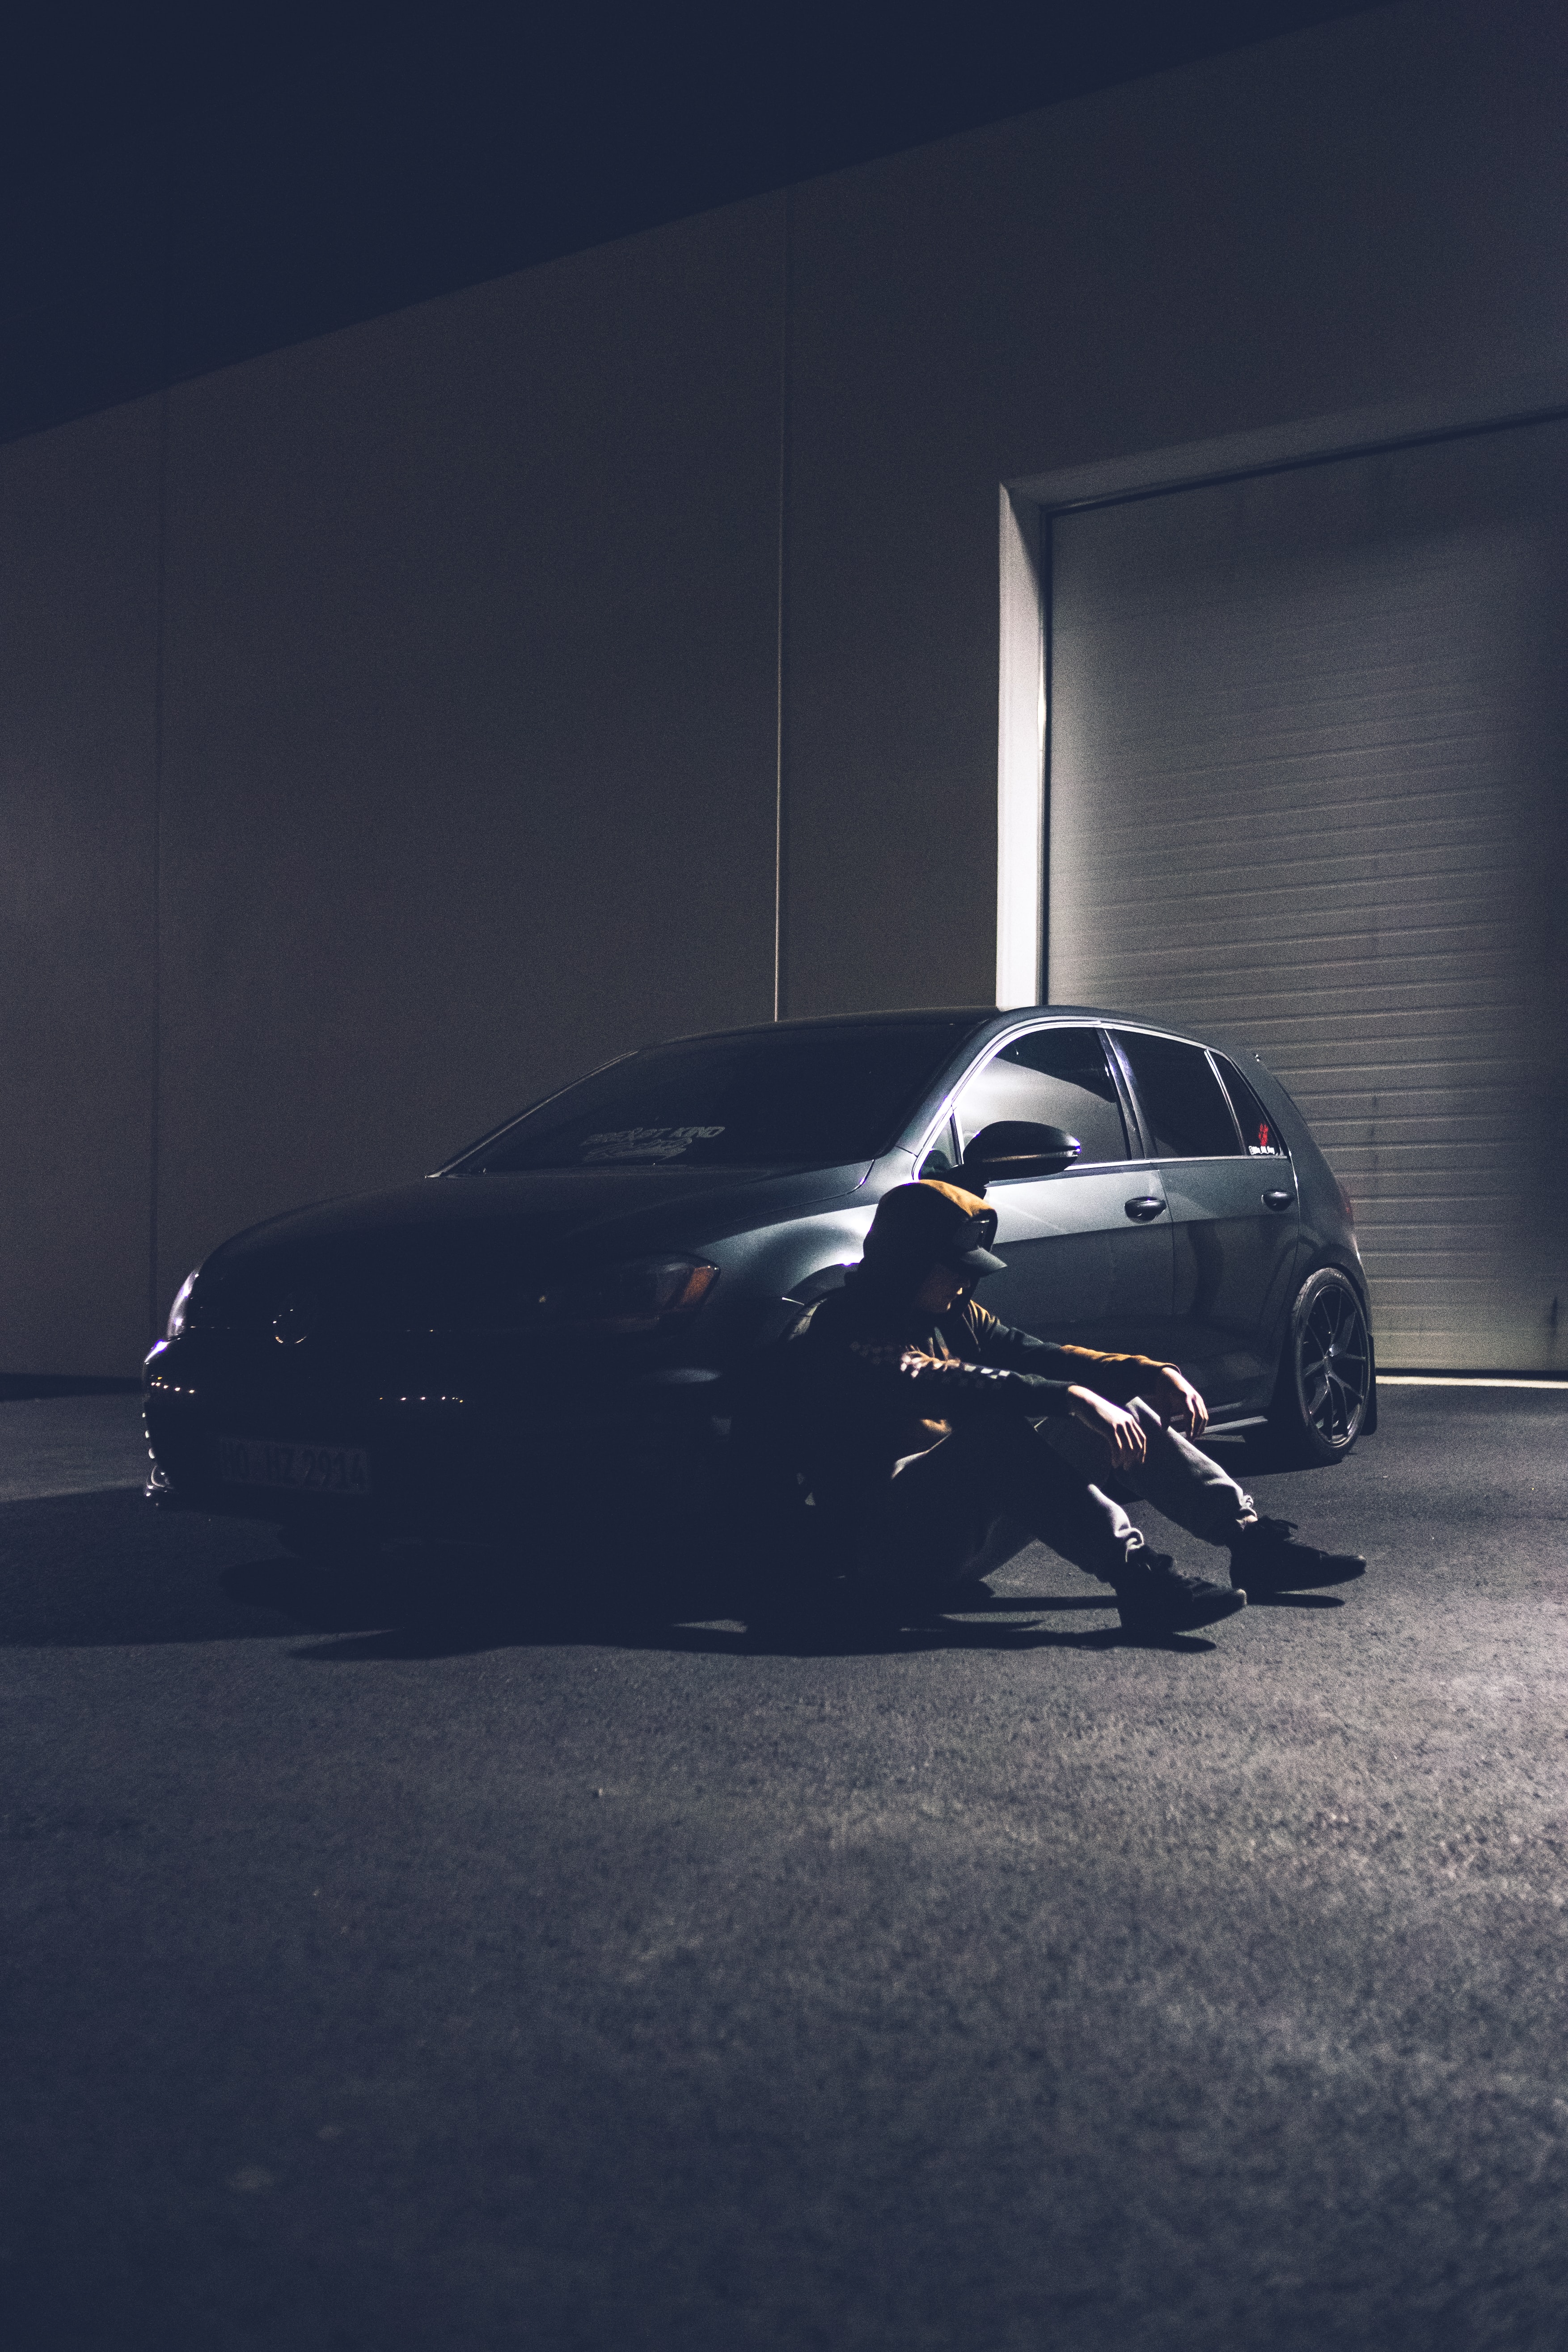 alone, loneliness, sadness, cars, car, machine, cap, lonely, sorrow QHD